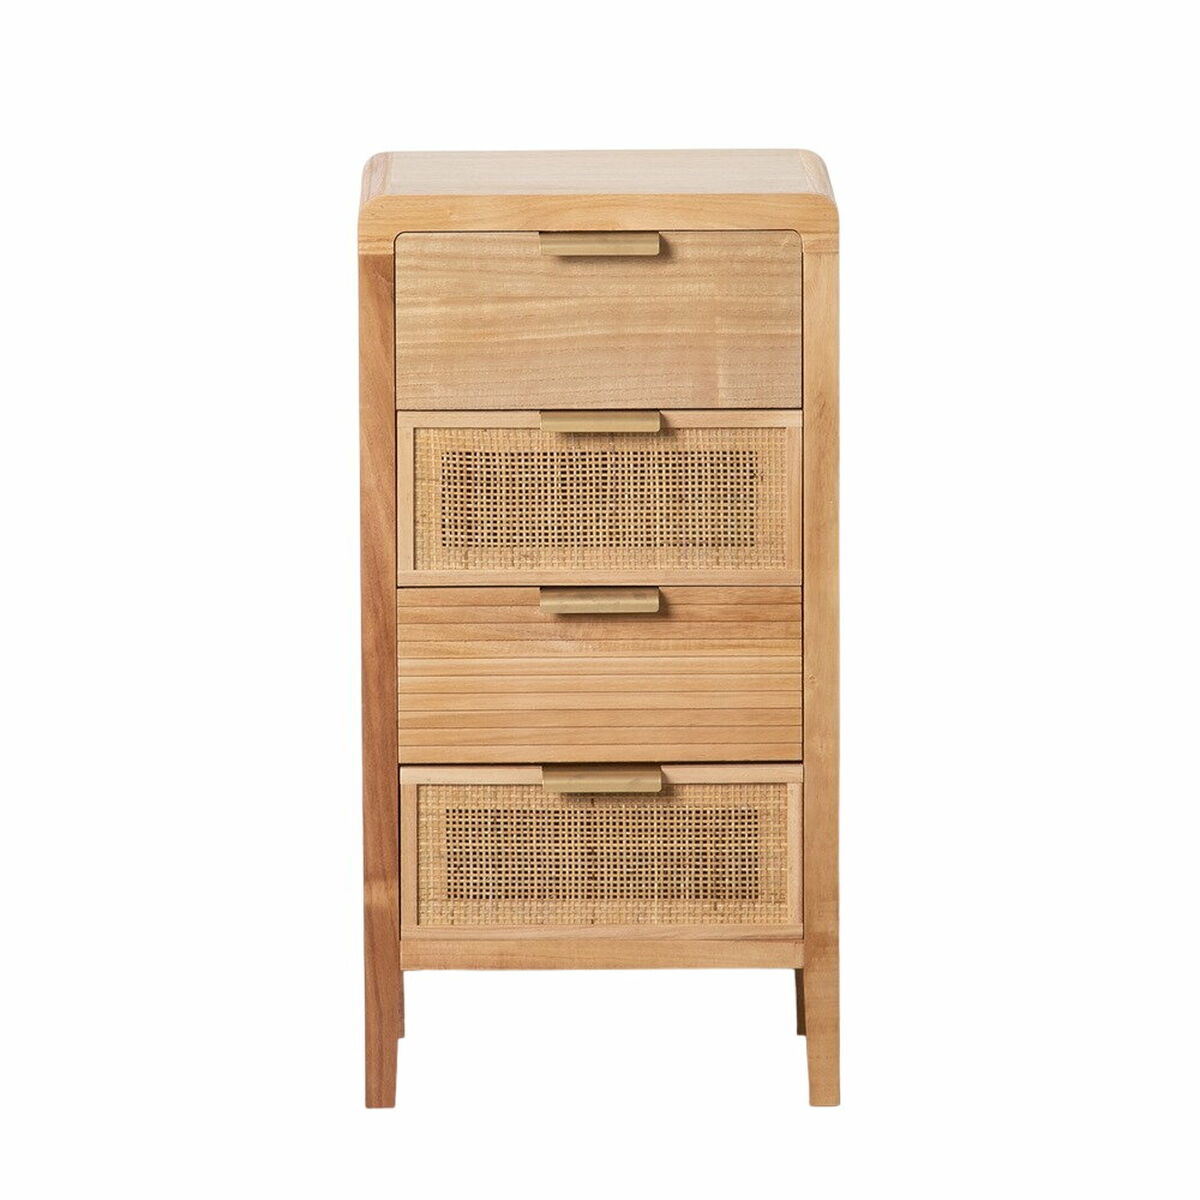 Nightstand HONEY Natural Paolownia wood MDF Wood 40 x 30 x 77,5 cm